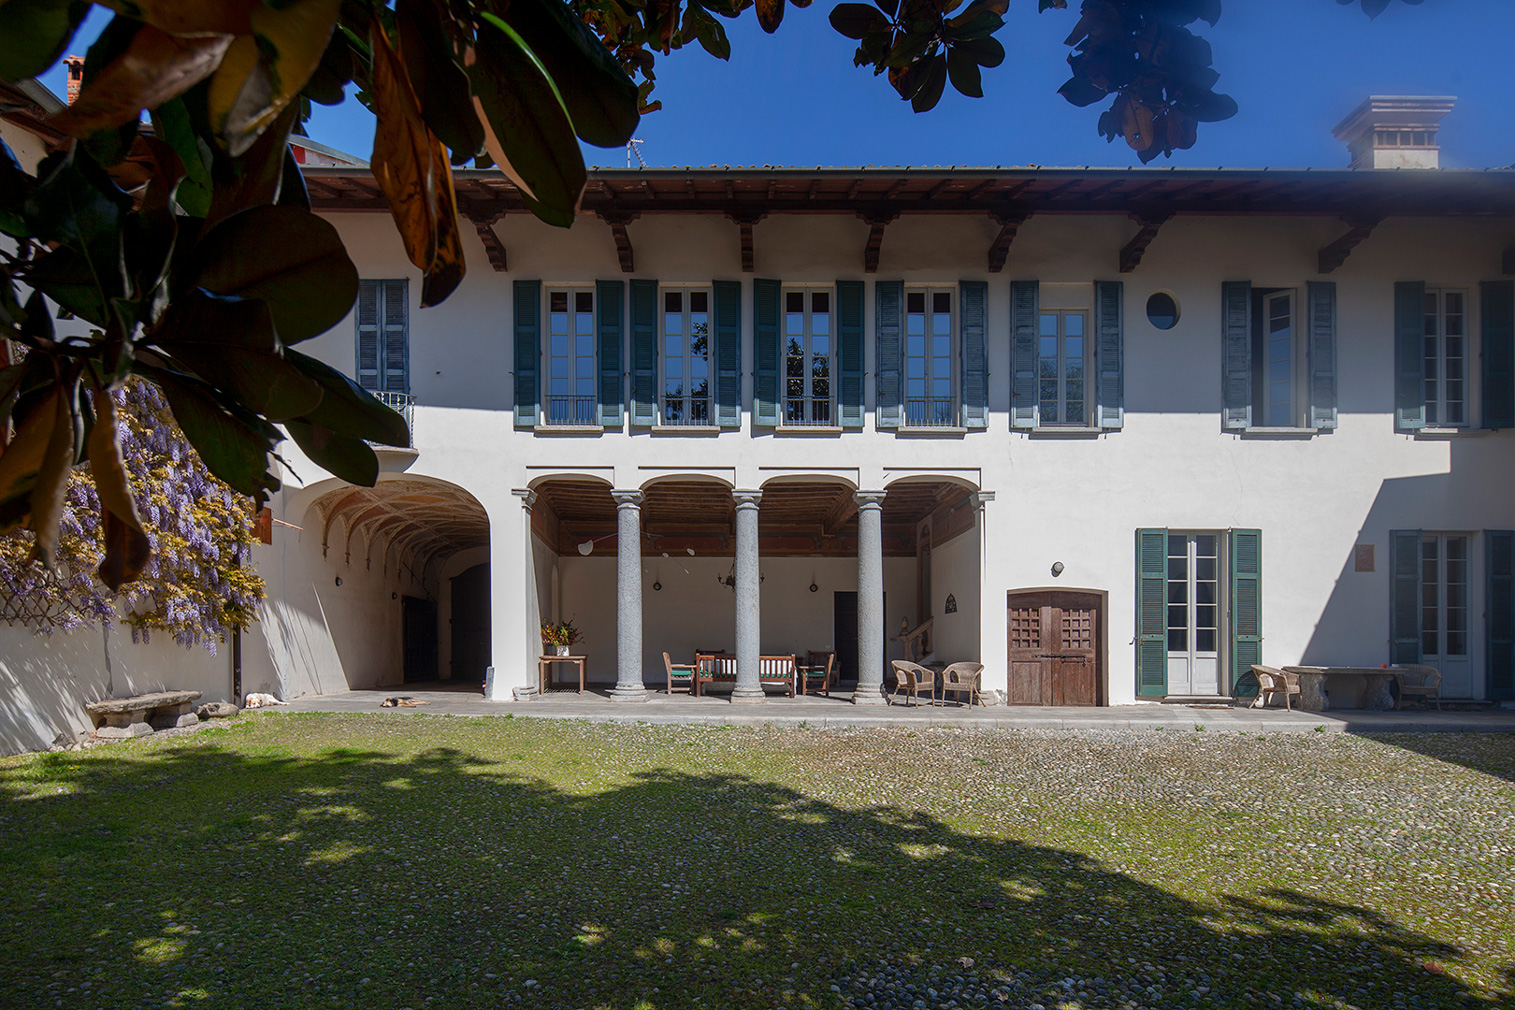 Villa Berla lets guests experience Baroque style in all its glory